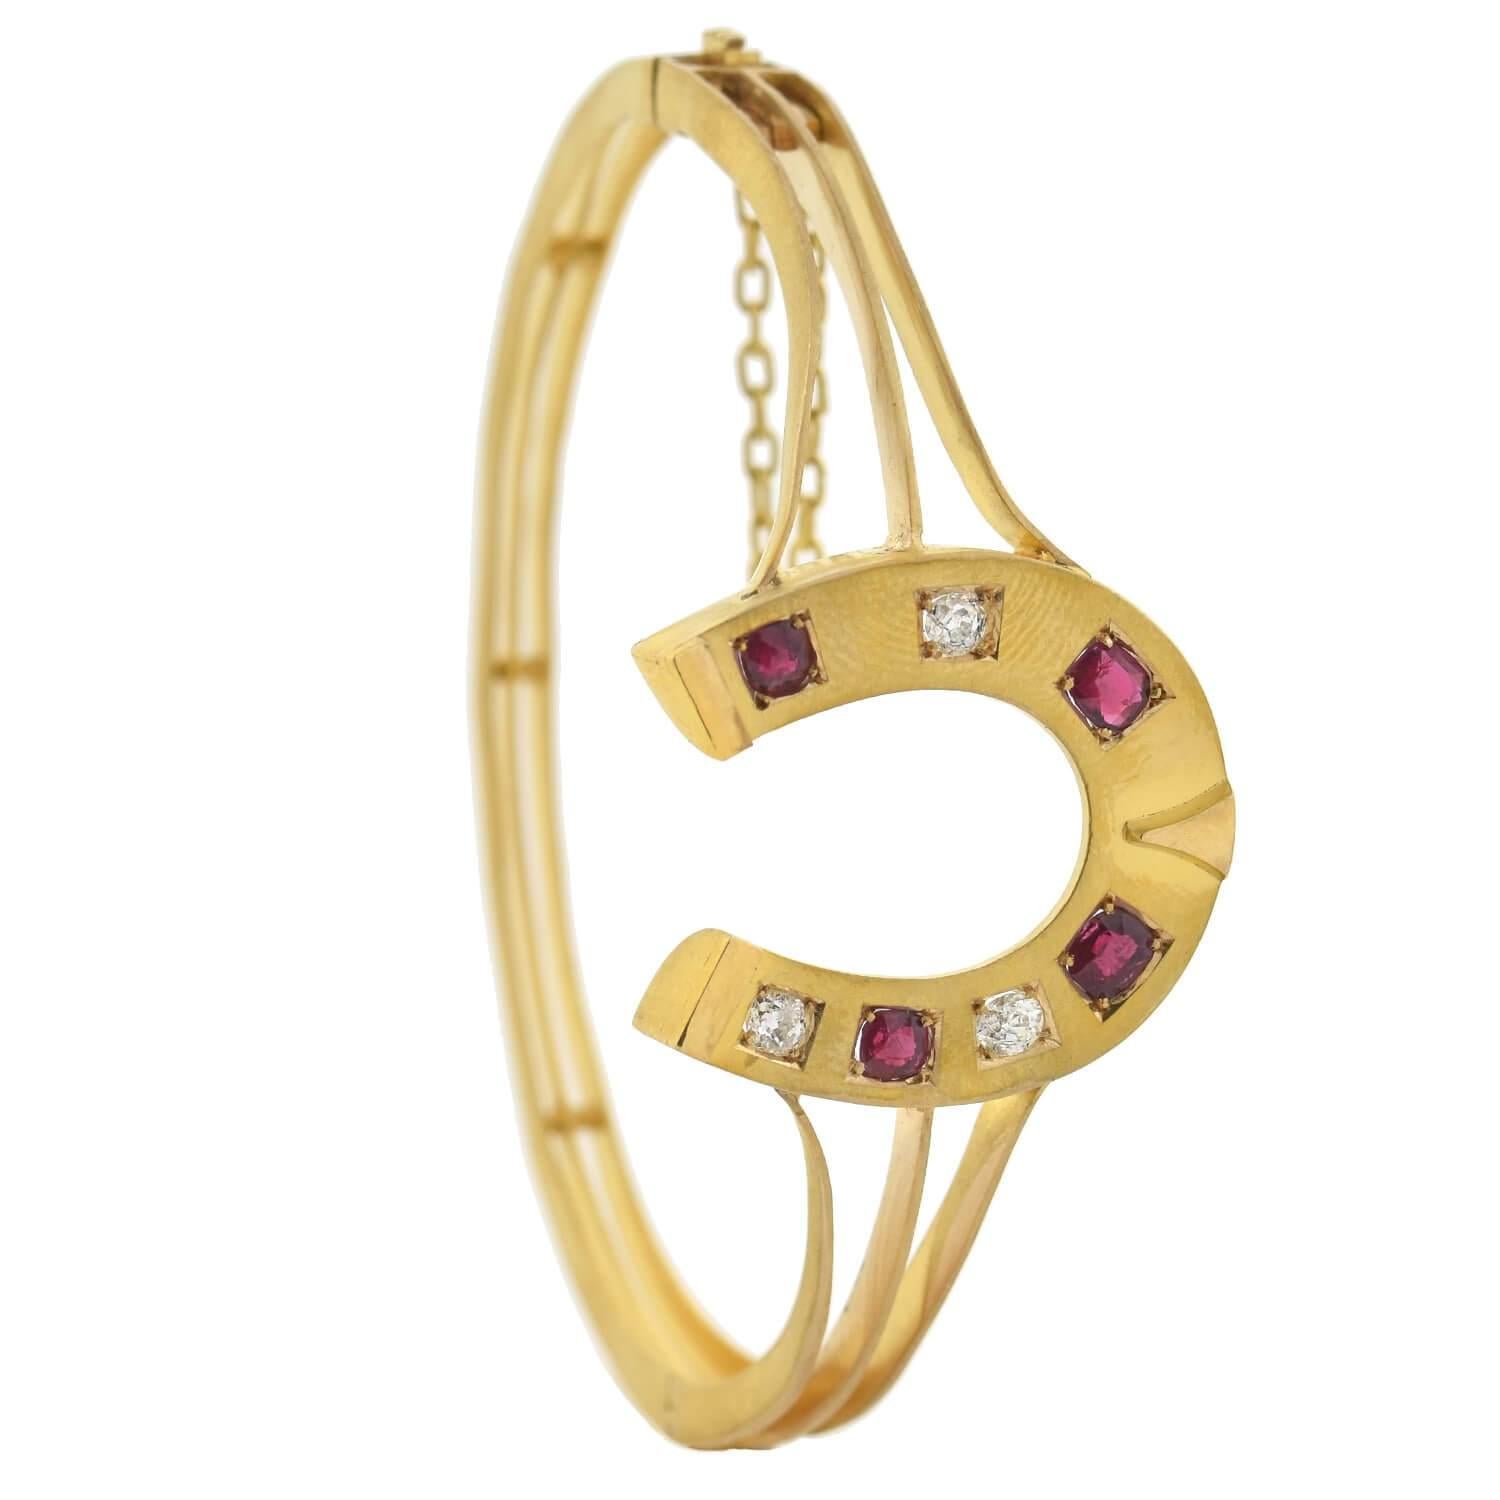 Victorian Diamond and Natural Ruby Horseshoe Bangle Bracelet In Good Condition For Sale In Narberth, PA